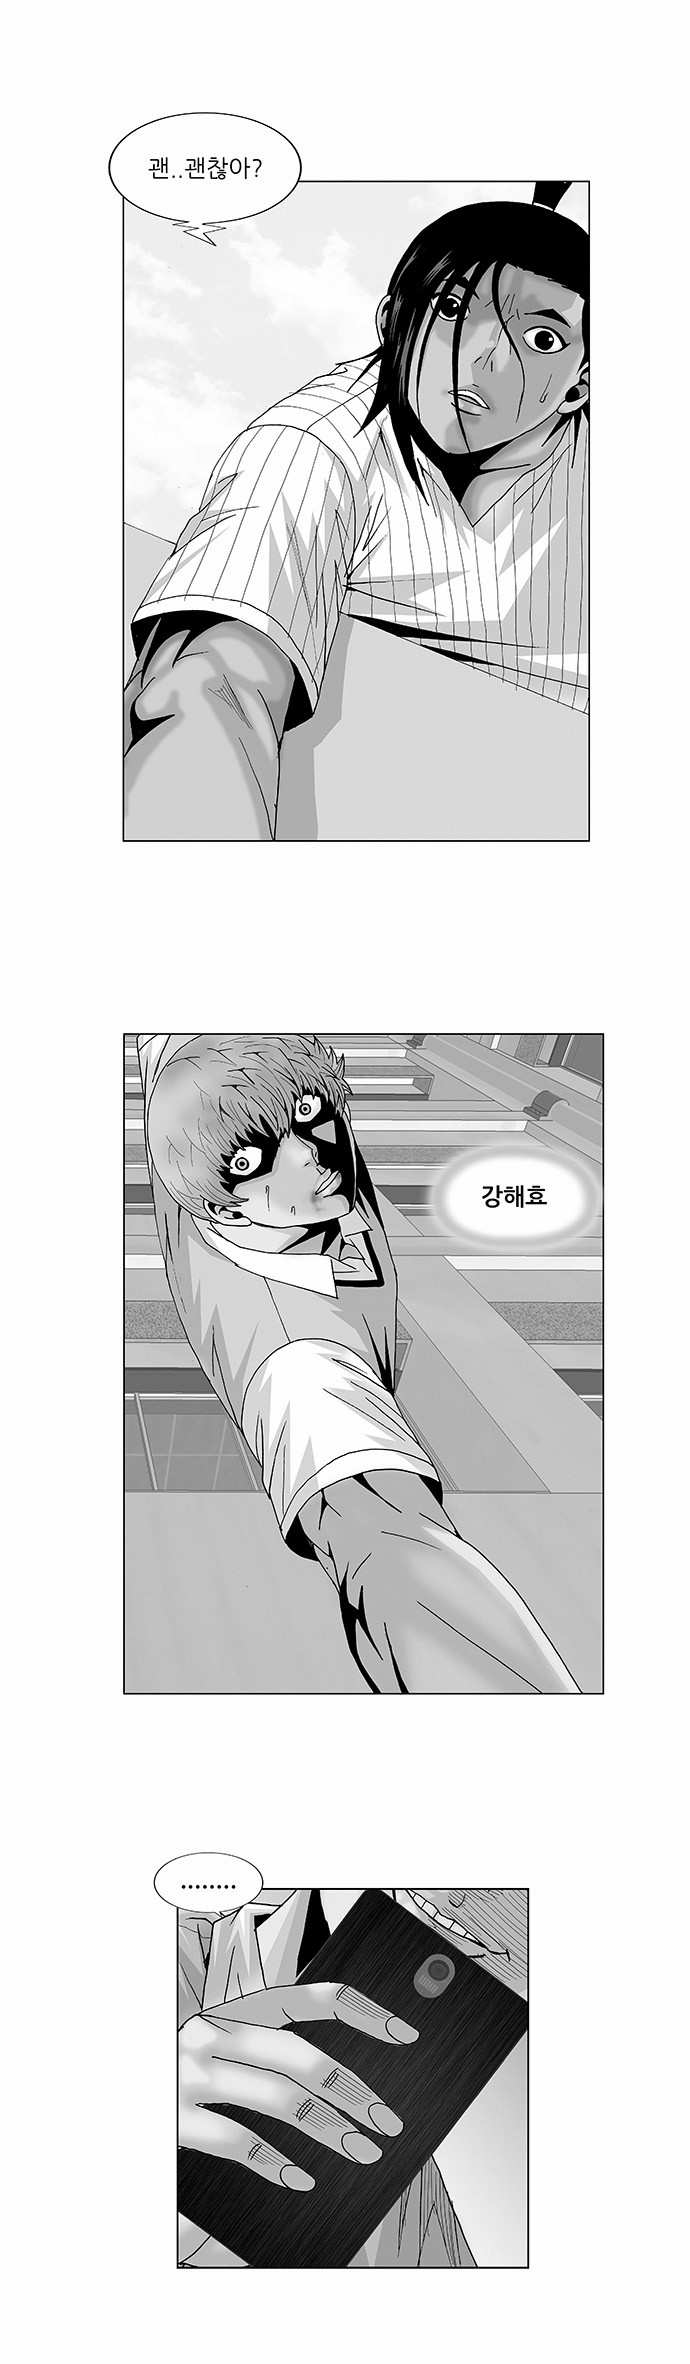 Ultimate Legend - Kang Hae Hyo - Chapter 104 - Page 1